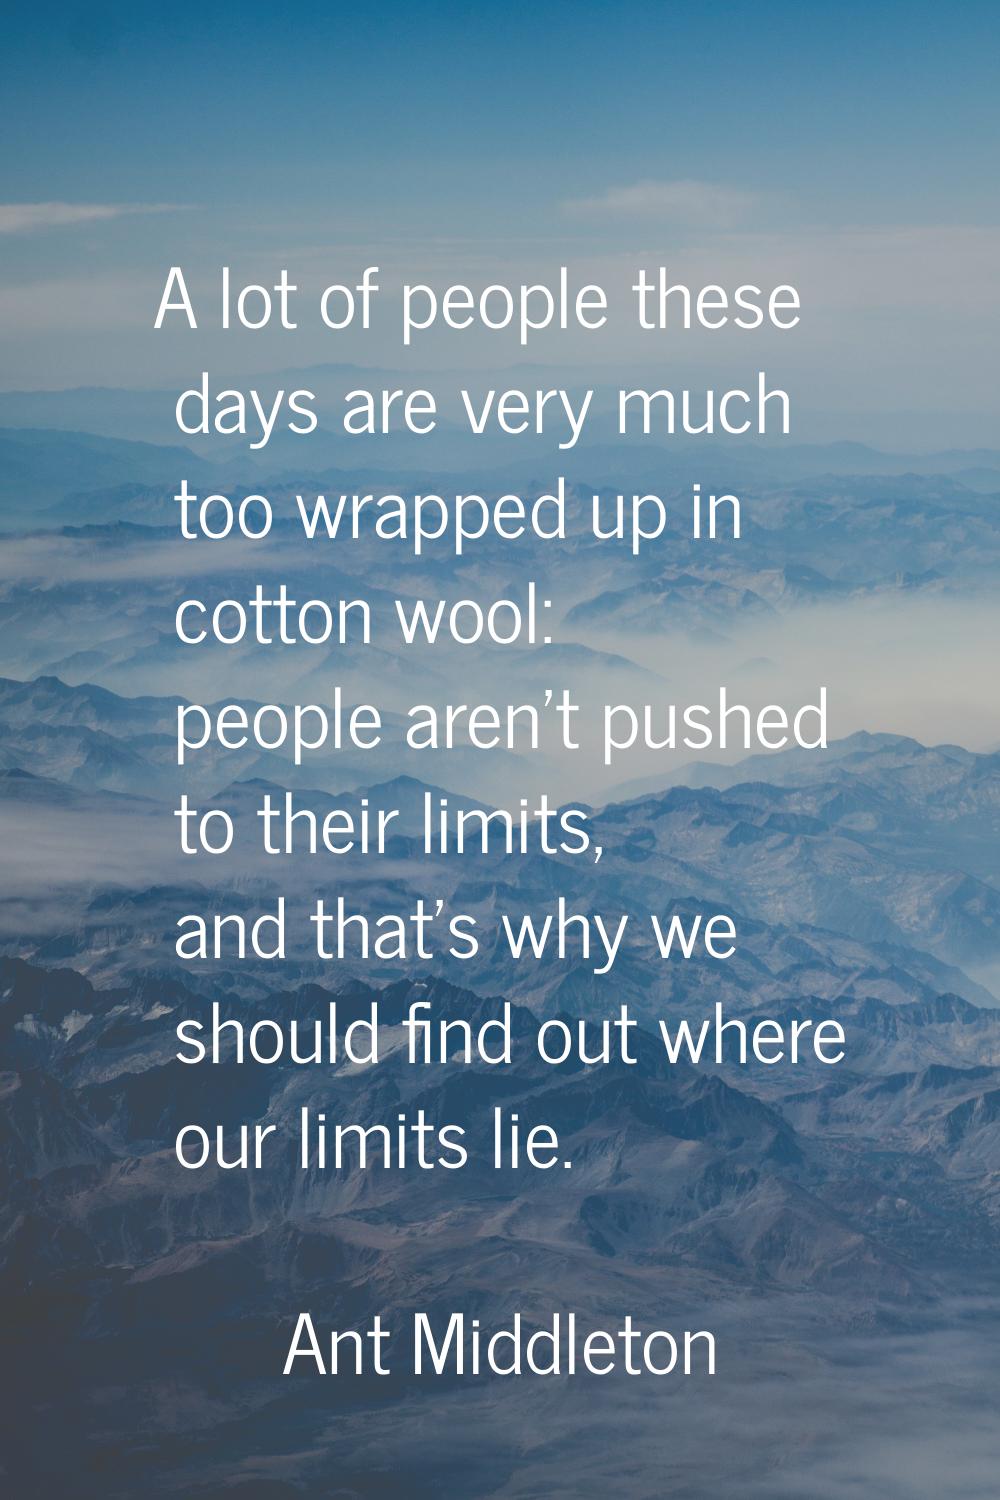 A lot of people these days are very much too wrapped up in cotton wool: people aren't pushed to the